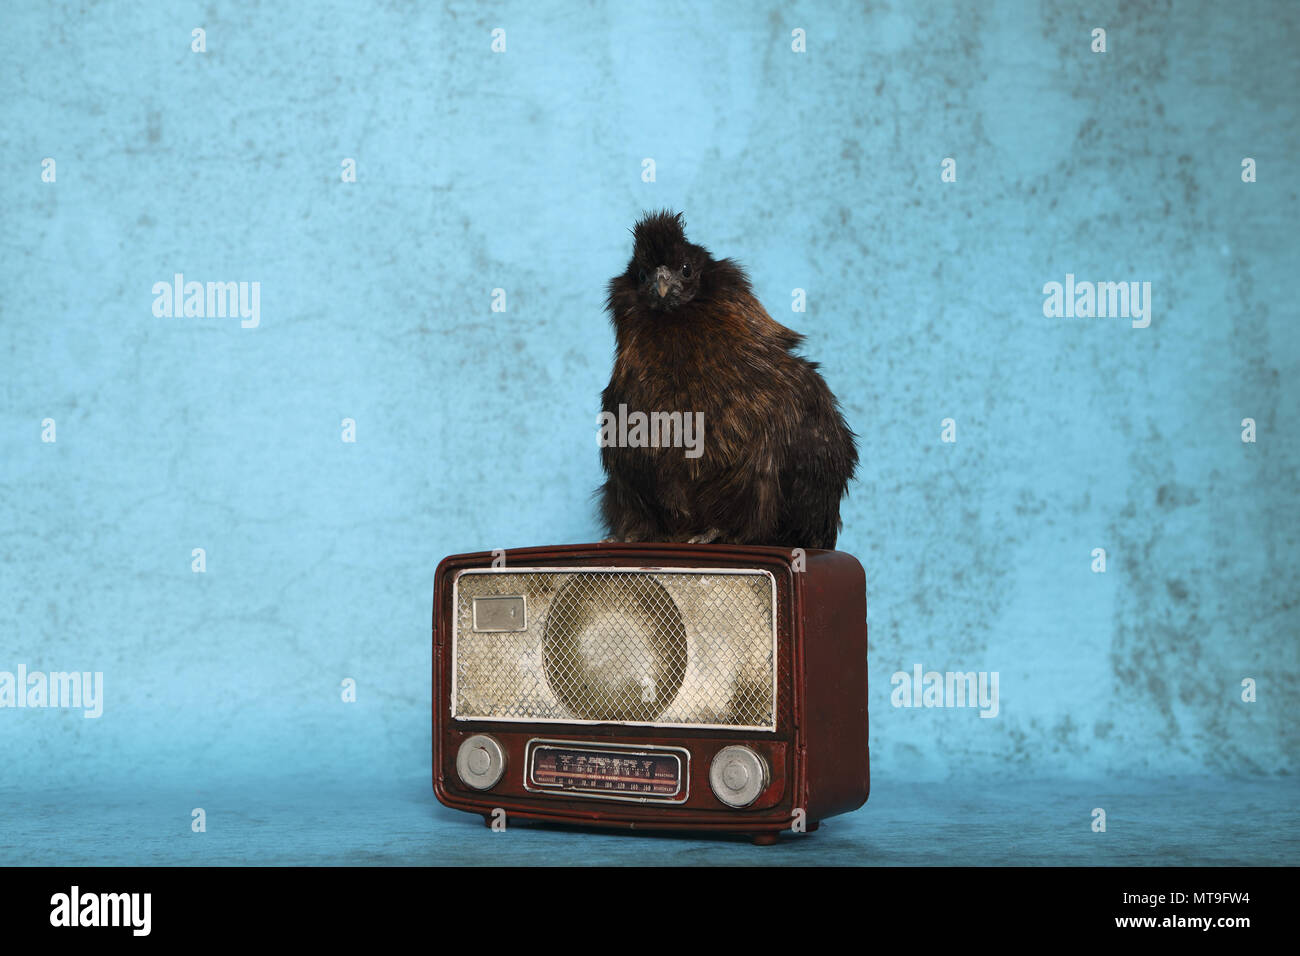 Domestic Chicken, Silkie, Silky. Adult standing on an old radio. Studio picture Stock Photo